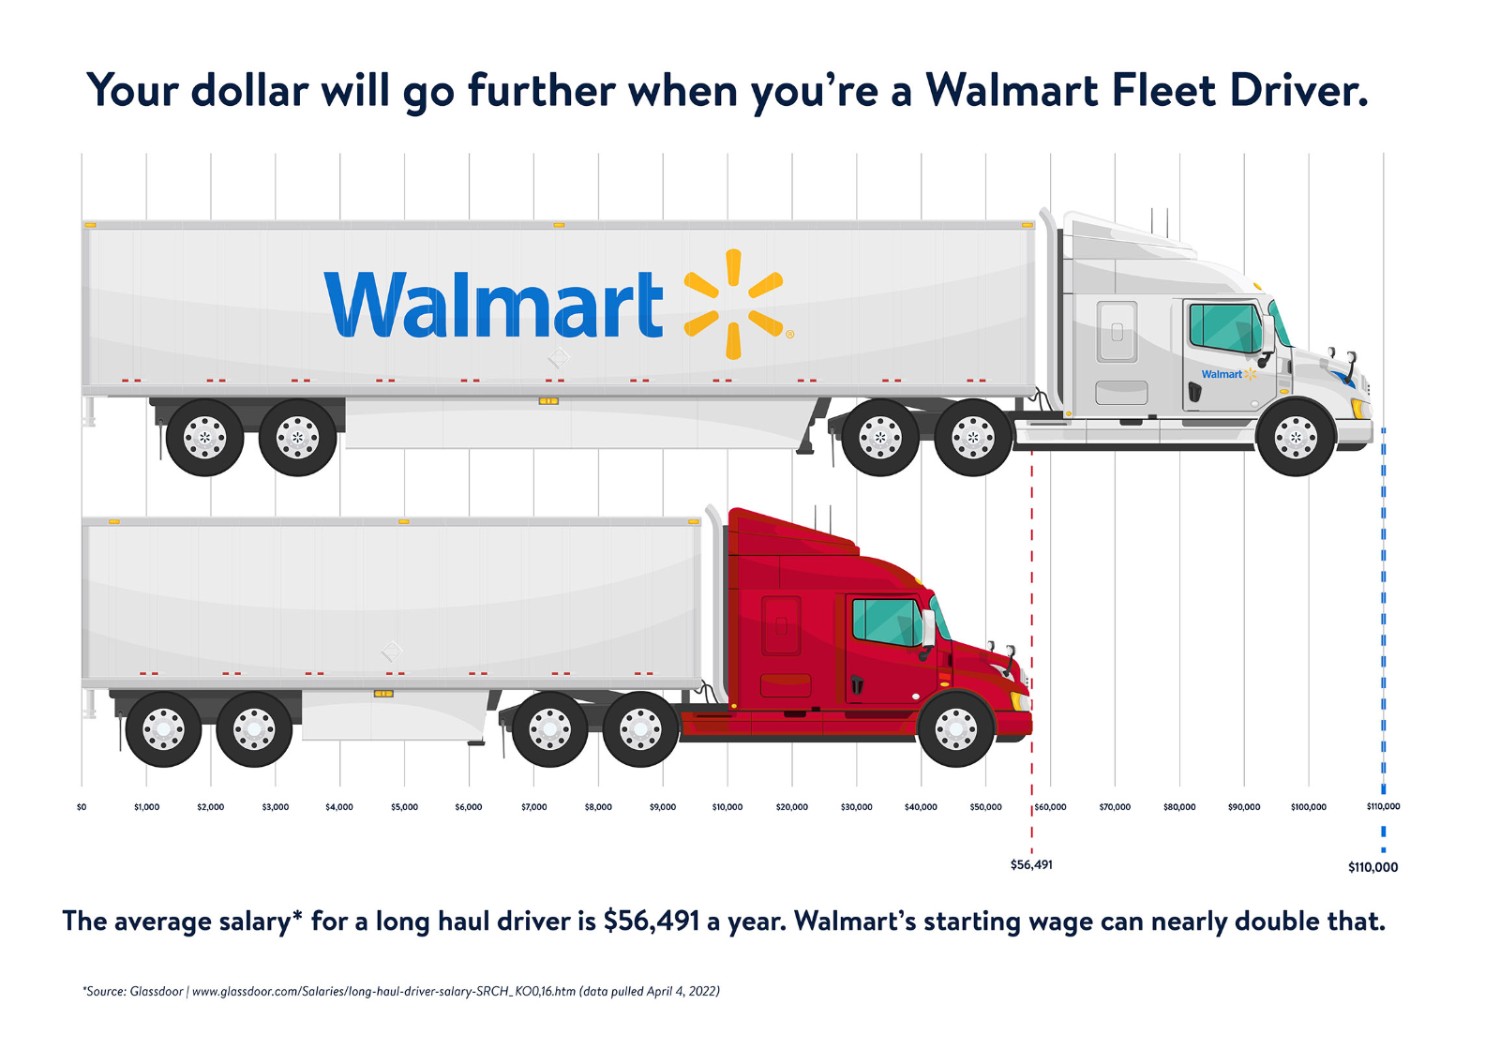 DriveIn Opportunity Walmart Raises Driver Pay and Launches Private